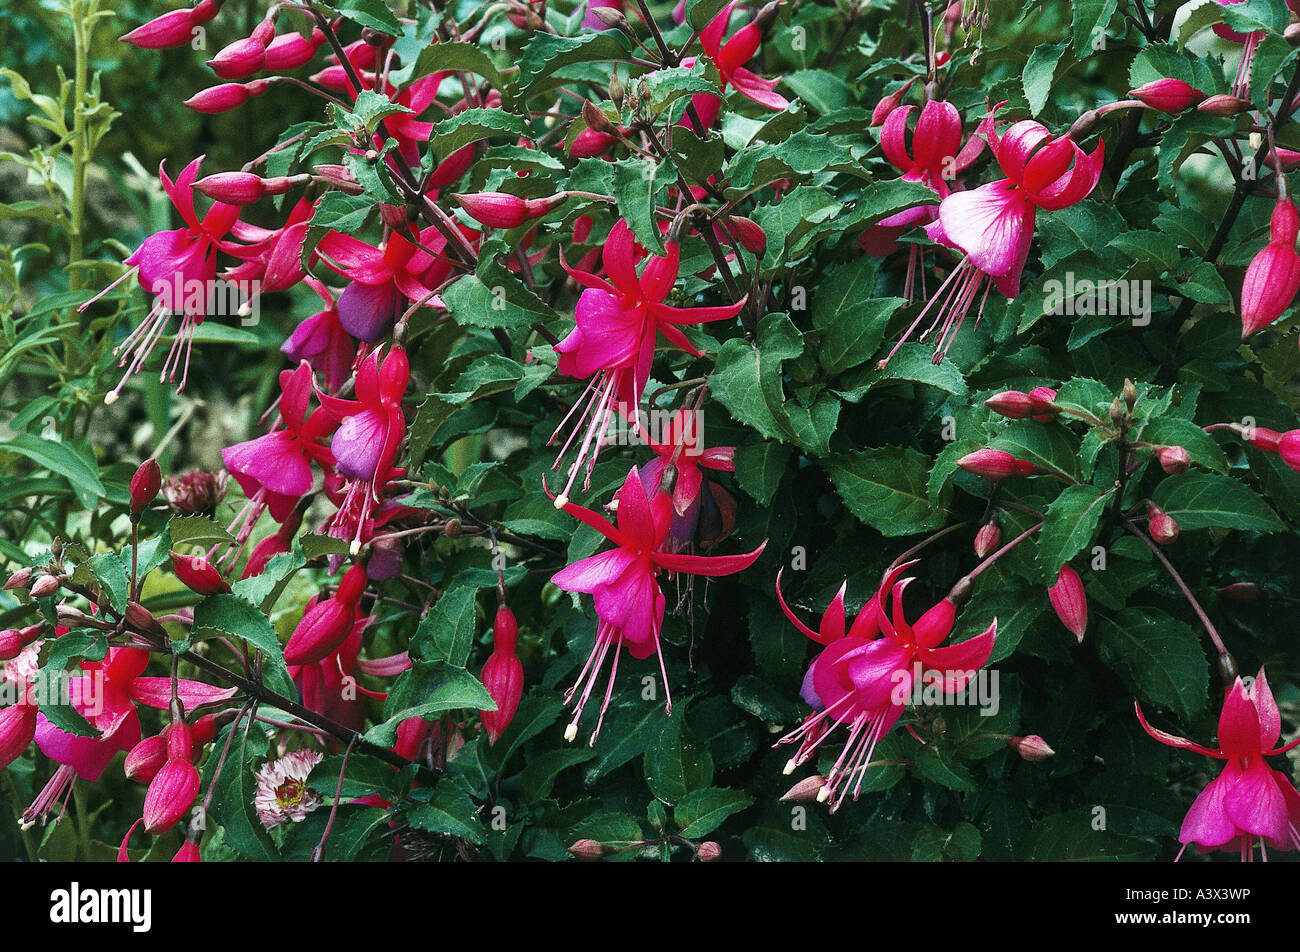 'botany, Fuchsia, (Fuchsia), cultivar, 'Leonora', blossoms and buds, Onagraceae, Rosidae, Myrtales, pink, red,' Stock Photo